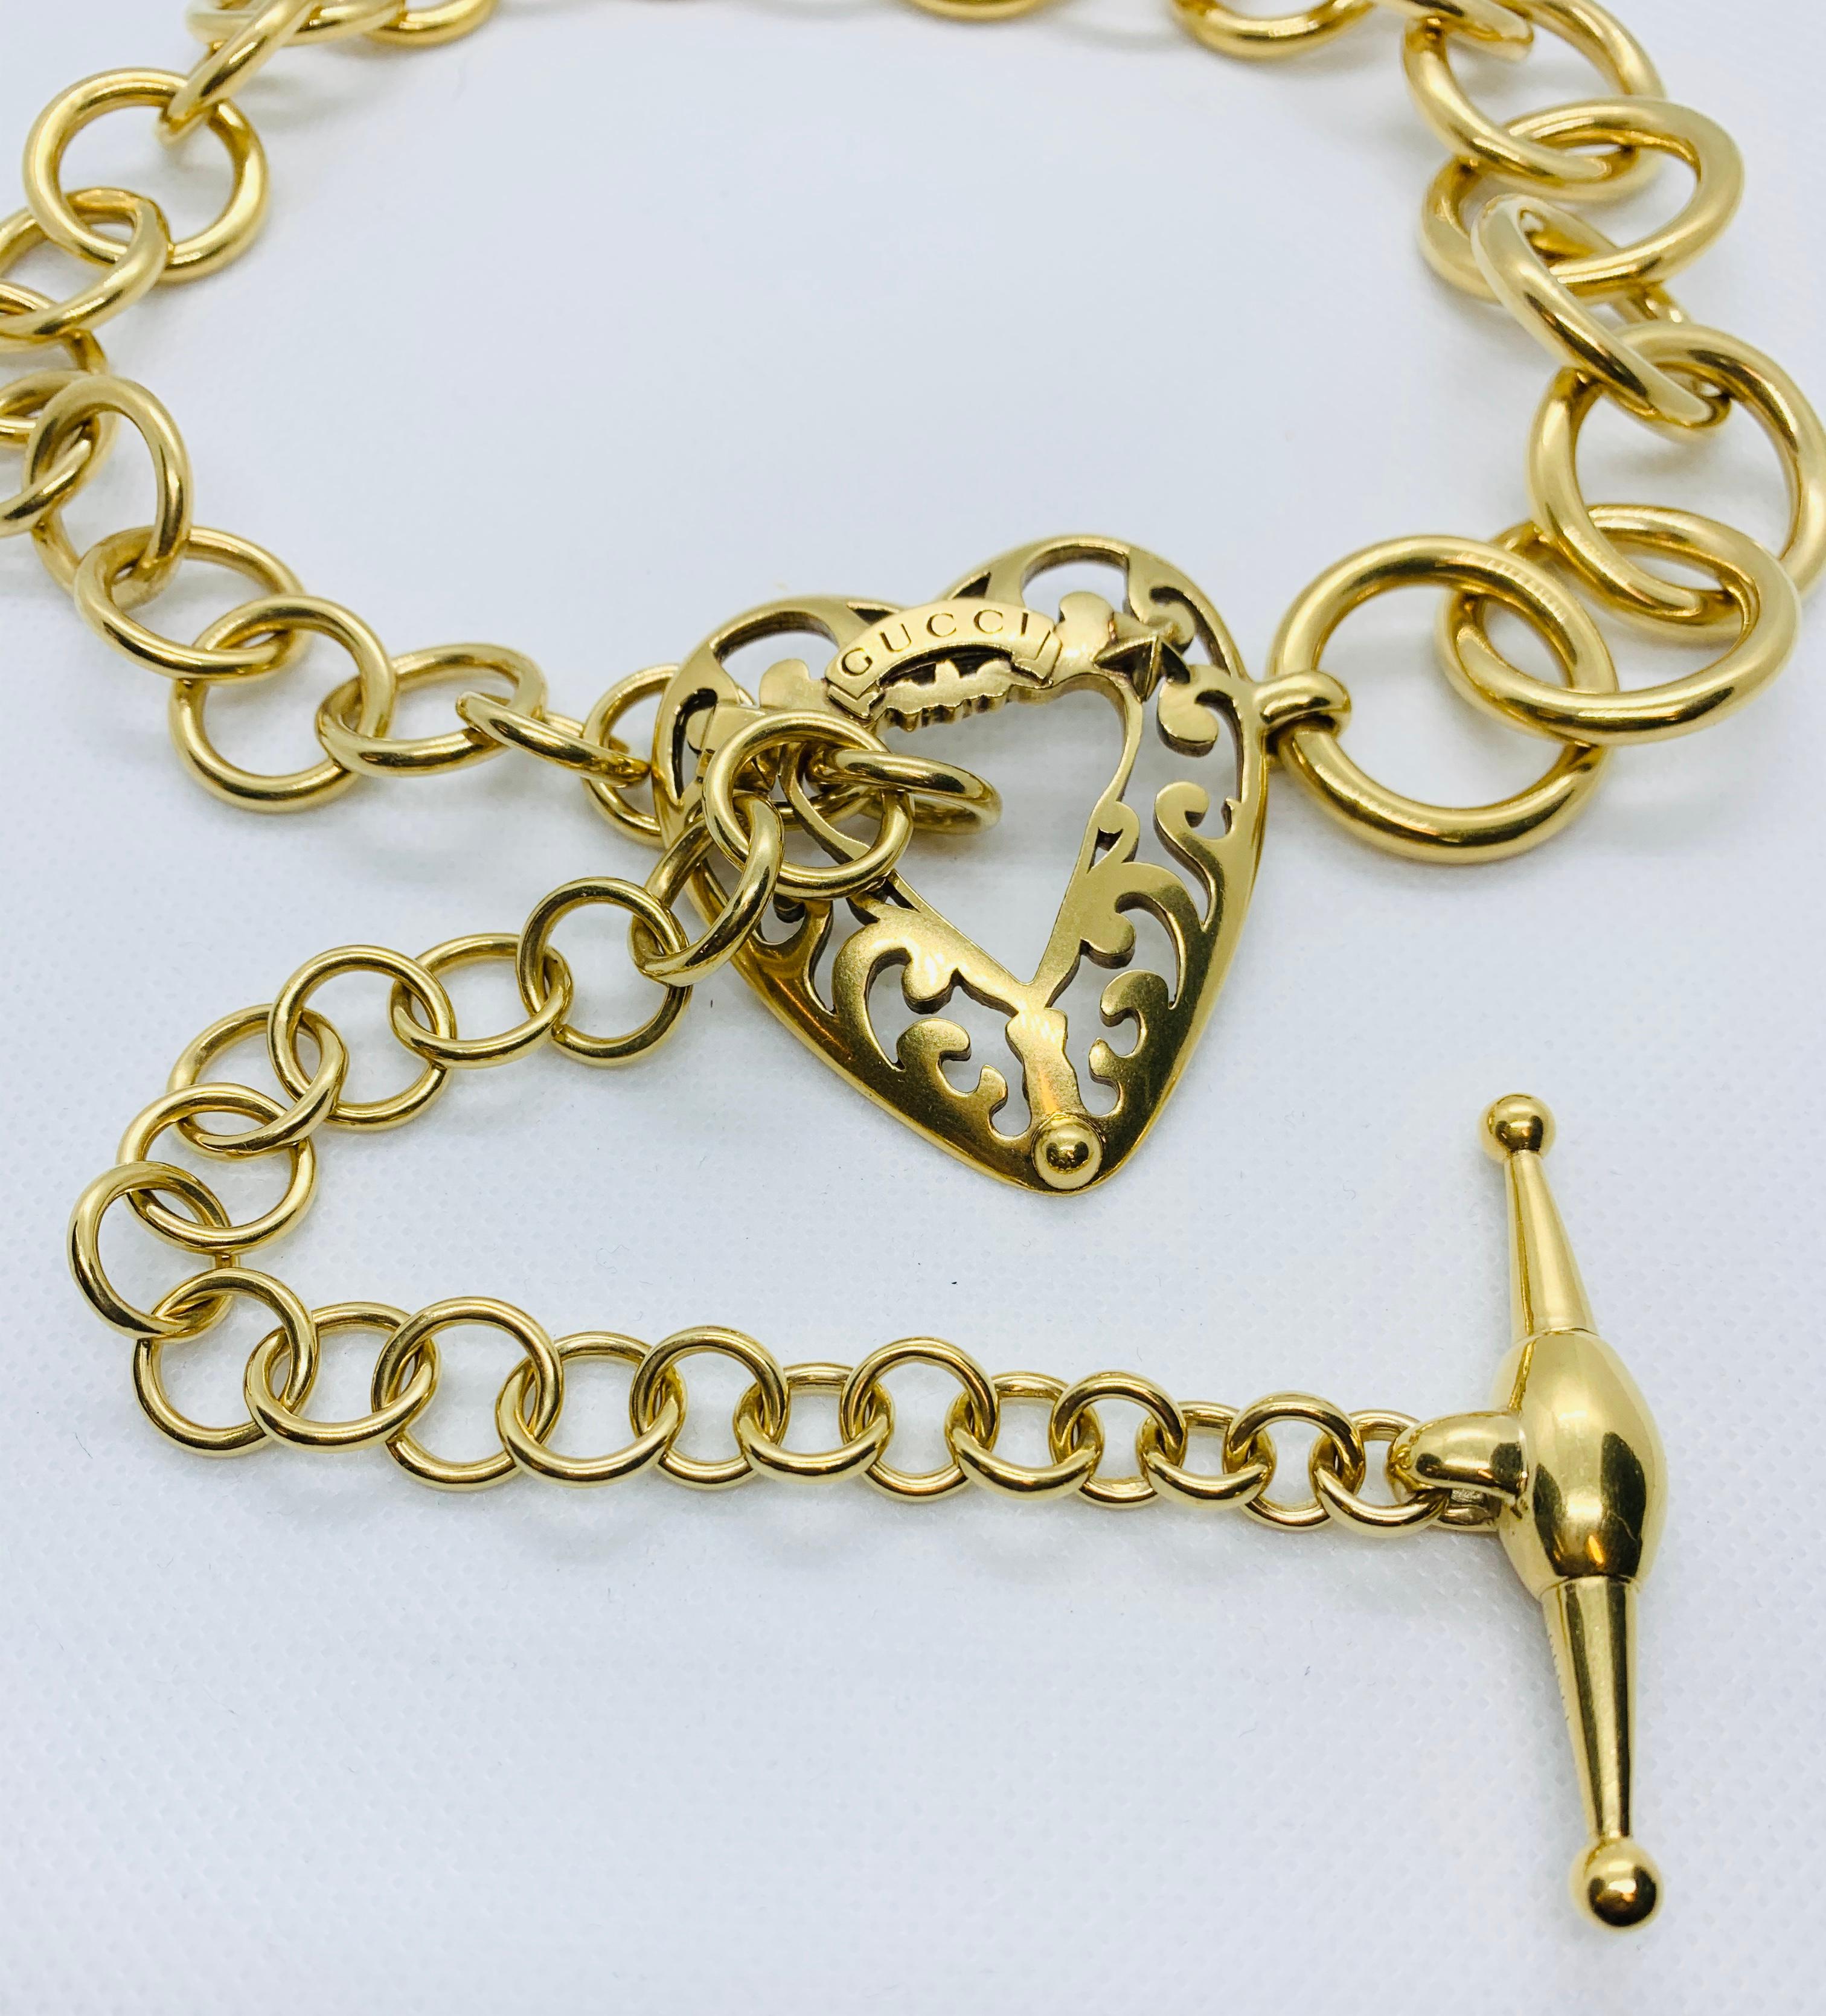 Signed Gucci 18 Karat Gold Link Toggle Necklace with Heart Shaped Center Piece 10